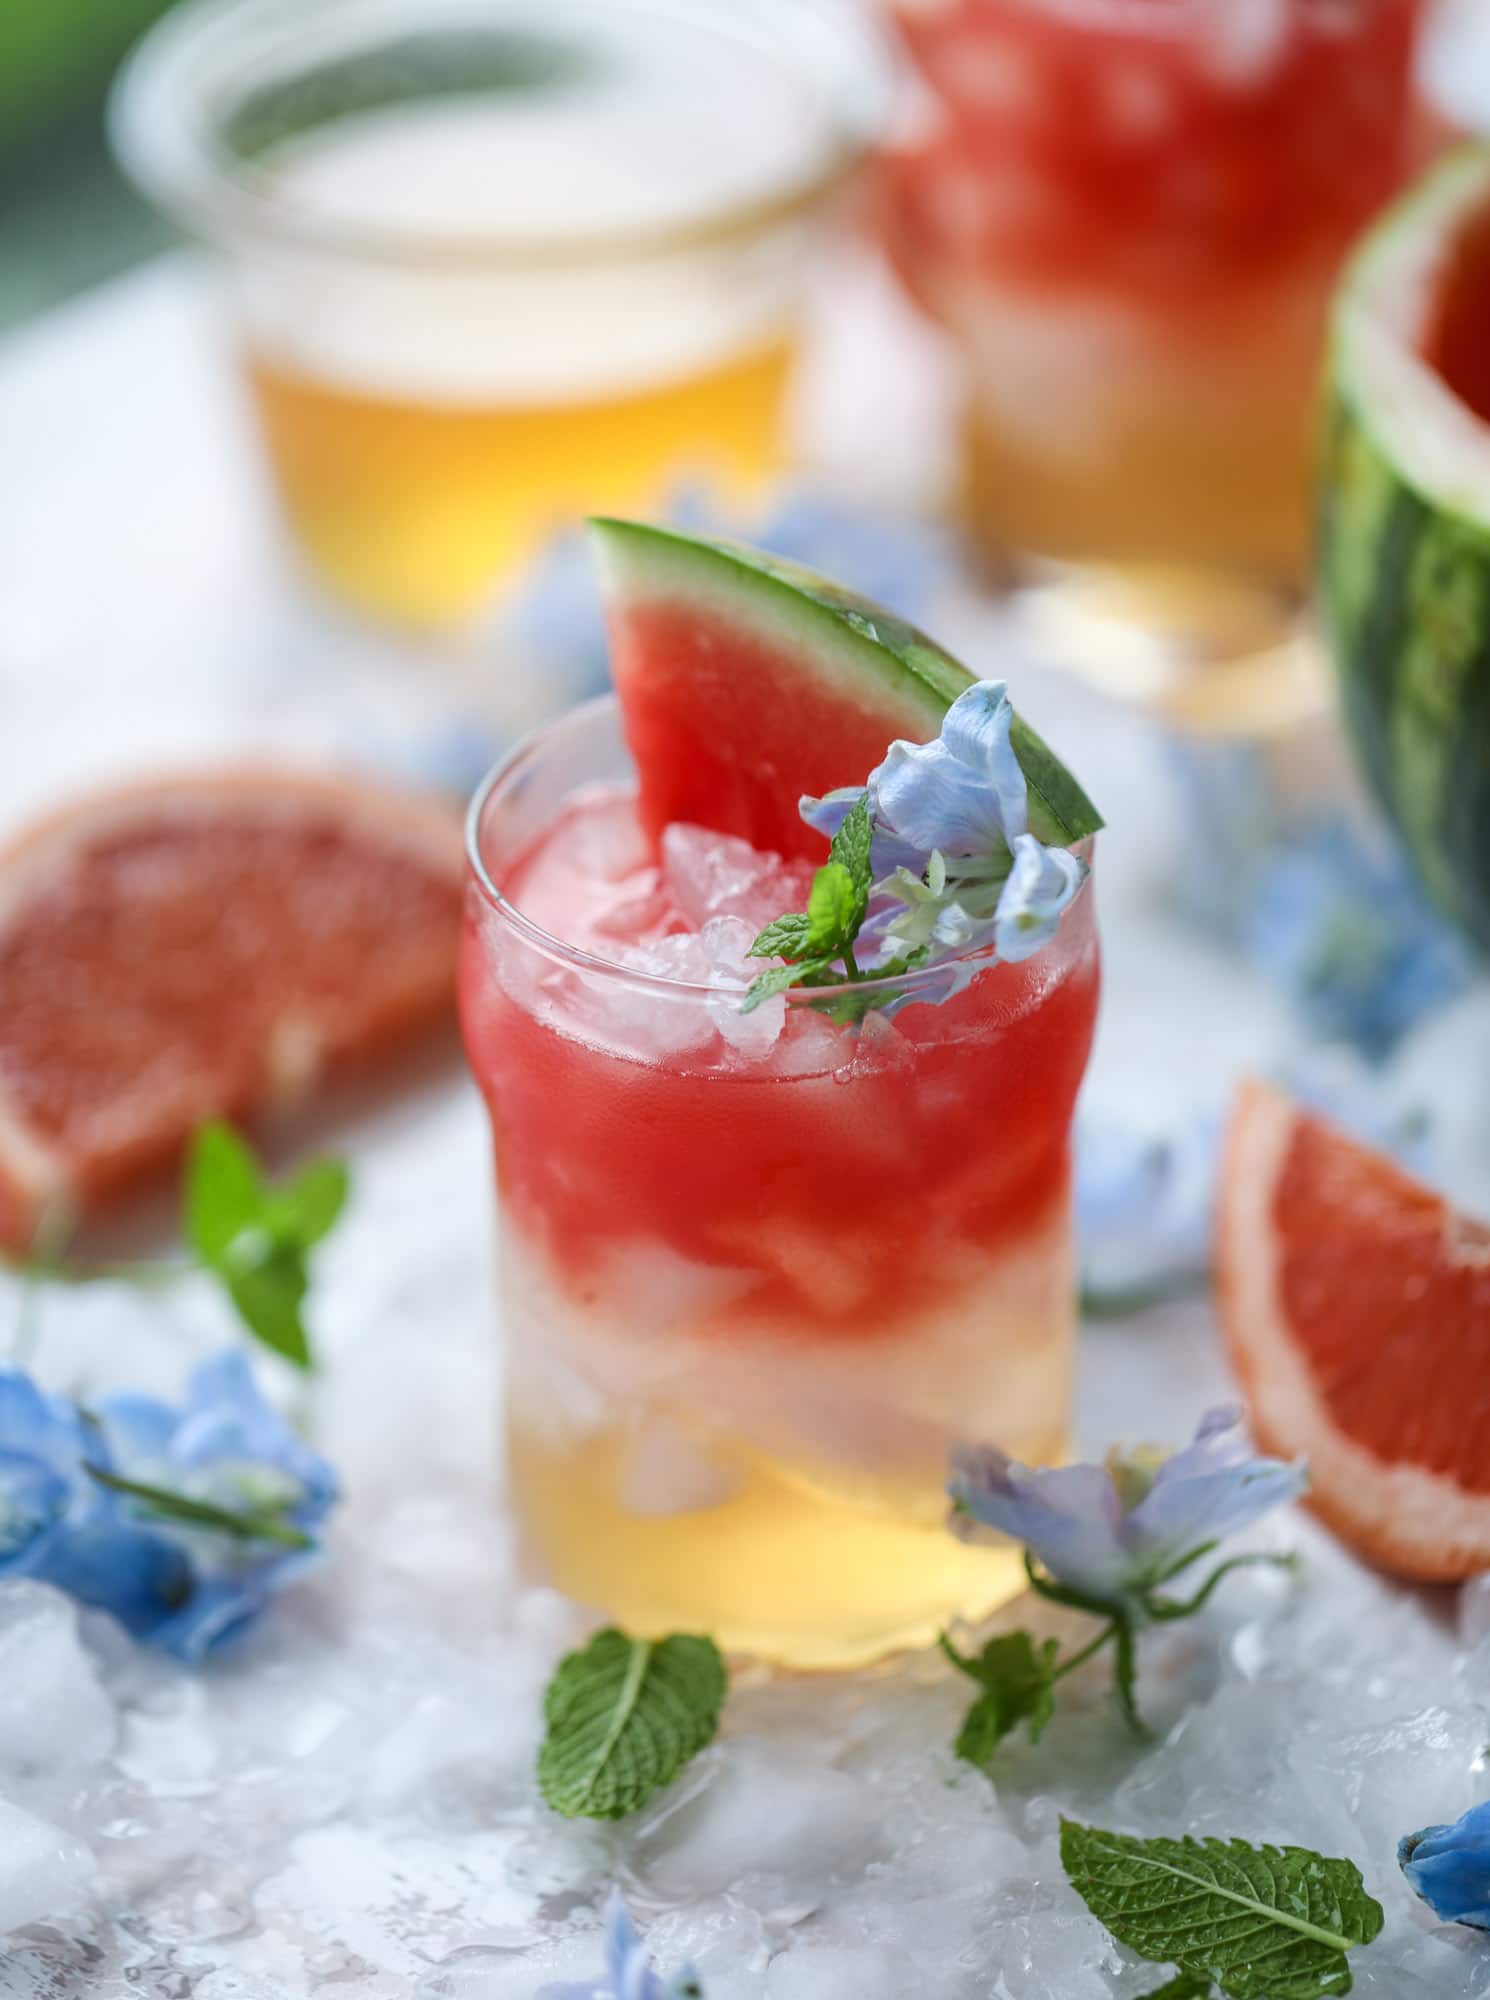 This watermelon grapefruit paloma cocktail is a summertime dream! Grapefruit syrup is super easy to make and when it's combined with fresh watermelon juice and tequila... oooh! Best happy hour ever. I howsweeteats.com #grapefruit #watermelon #paloma #cocktail #tequila